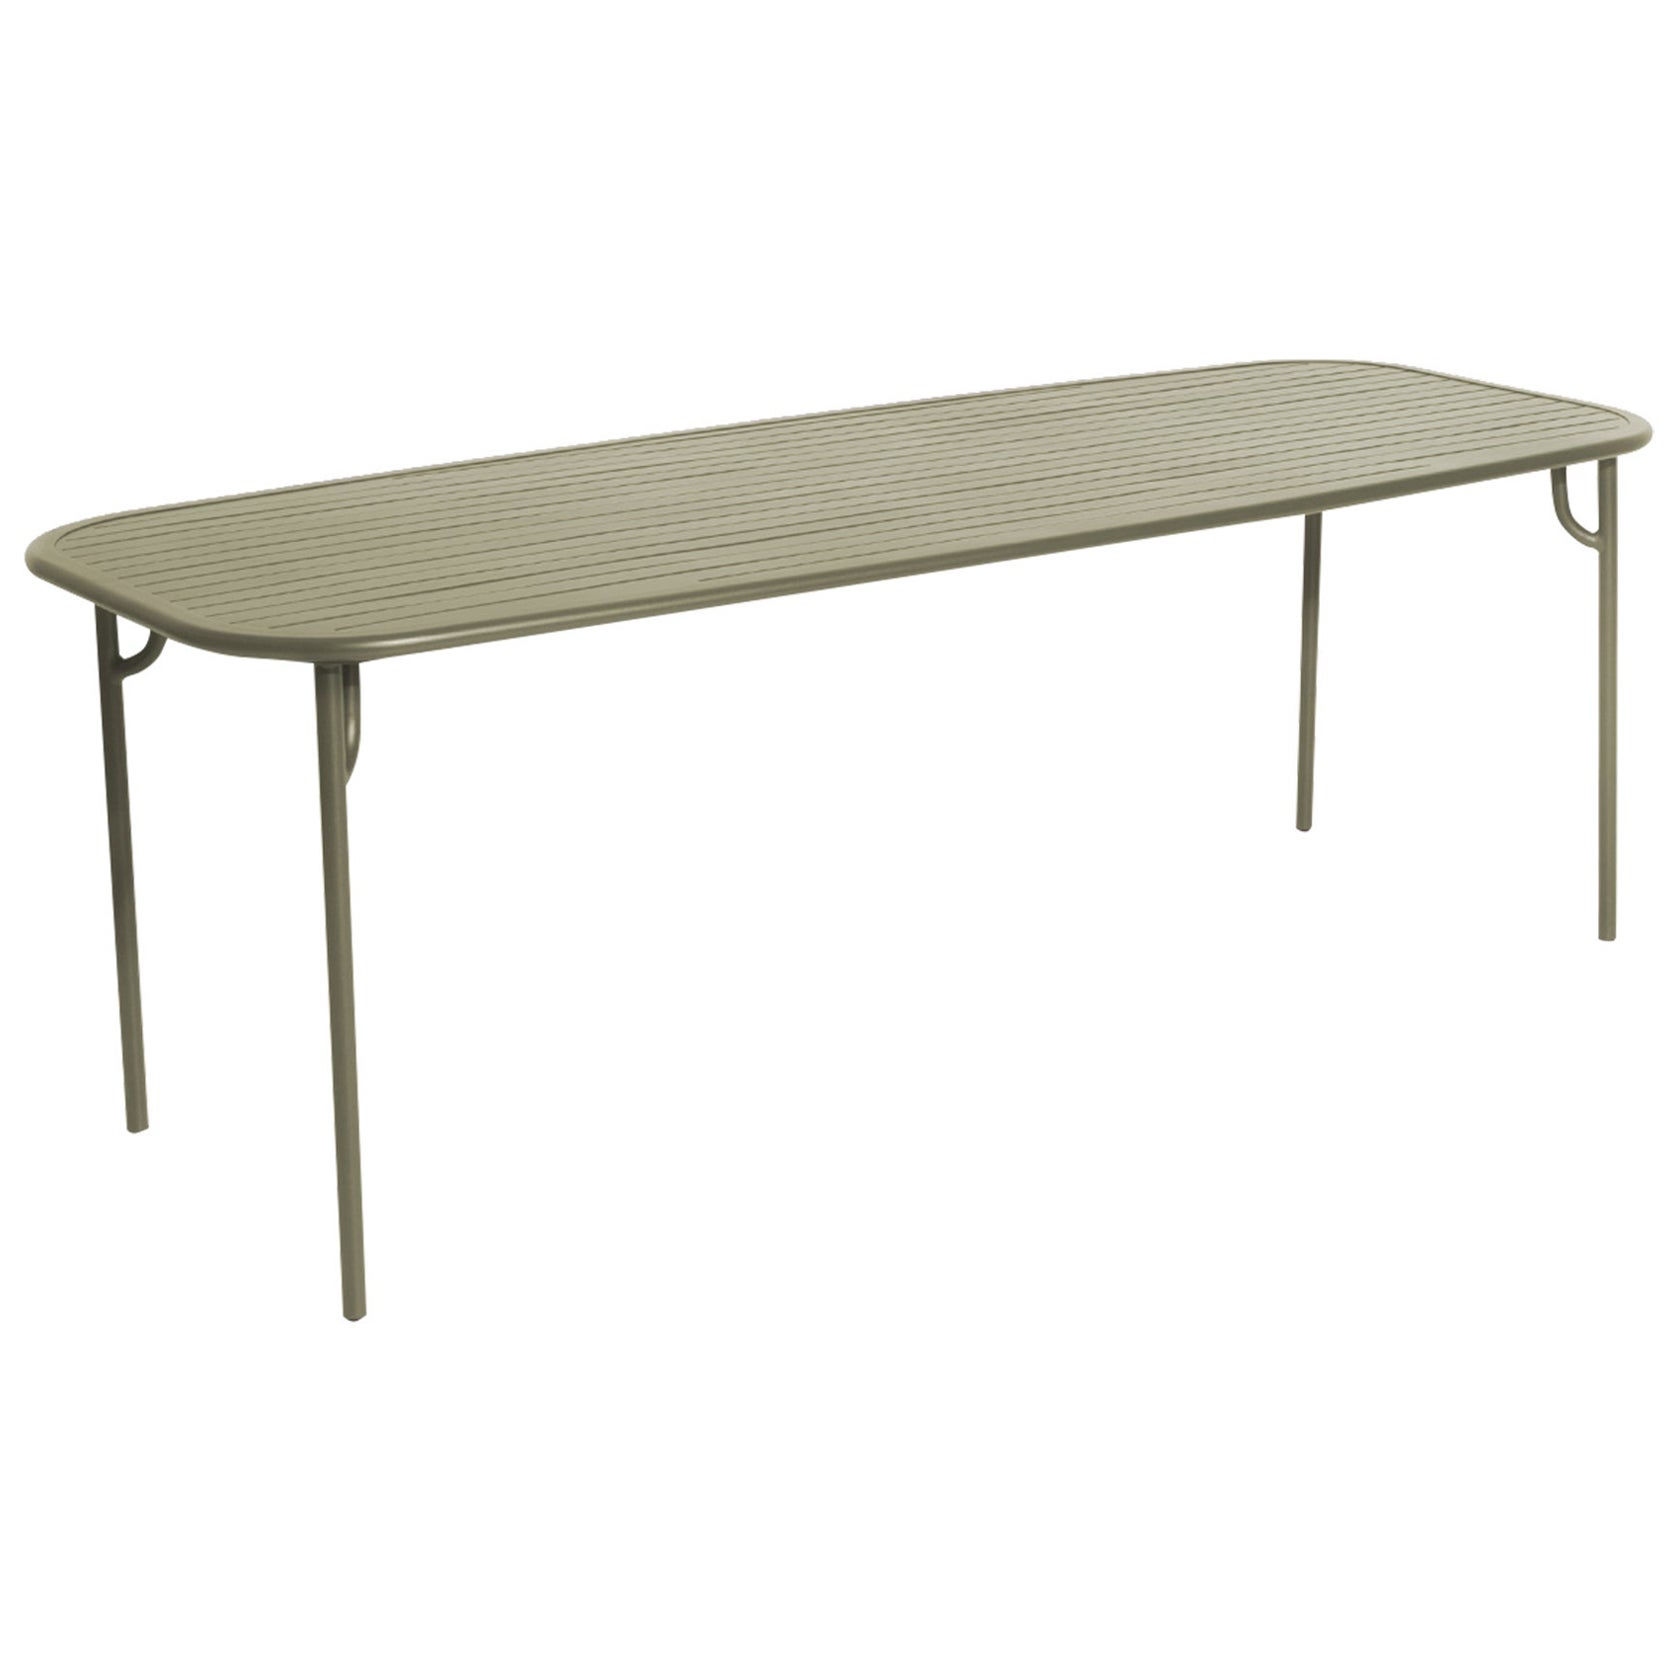 Petite Friture Week-End Large Rectangular Dining Table in Jade Green with Slats For Sale